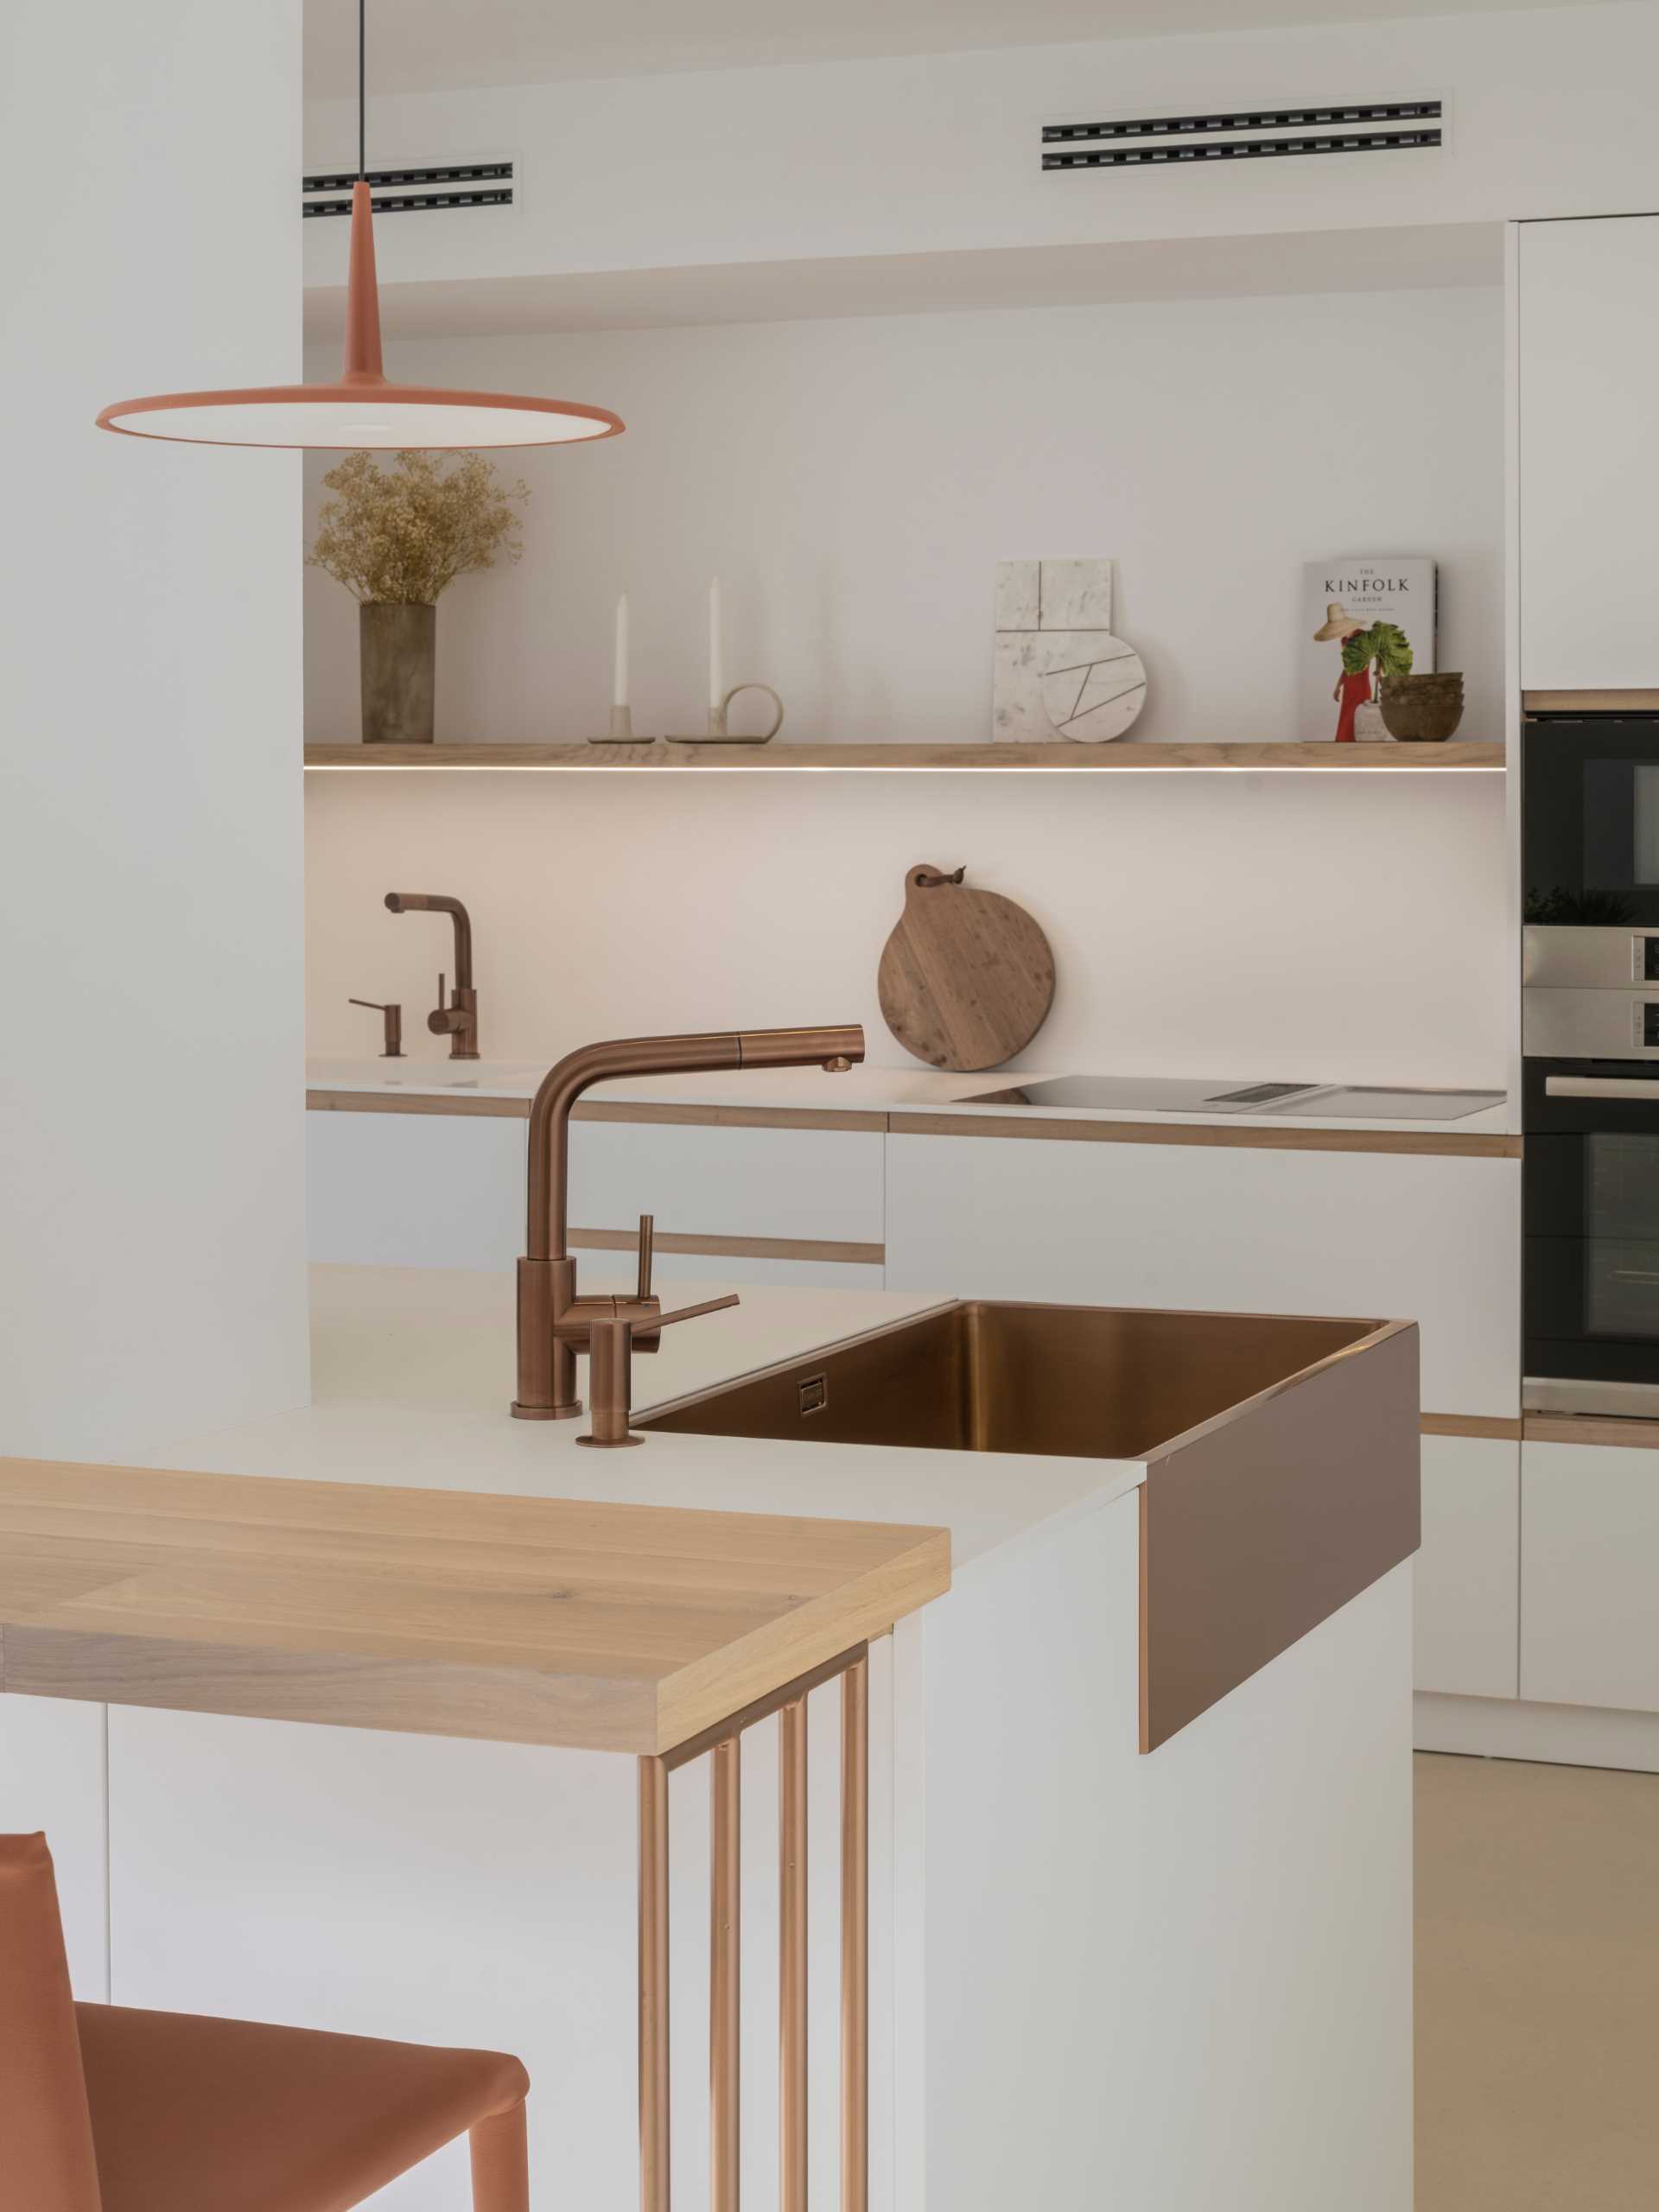 A modern kitchen with a white and copper color palette.